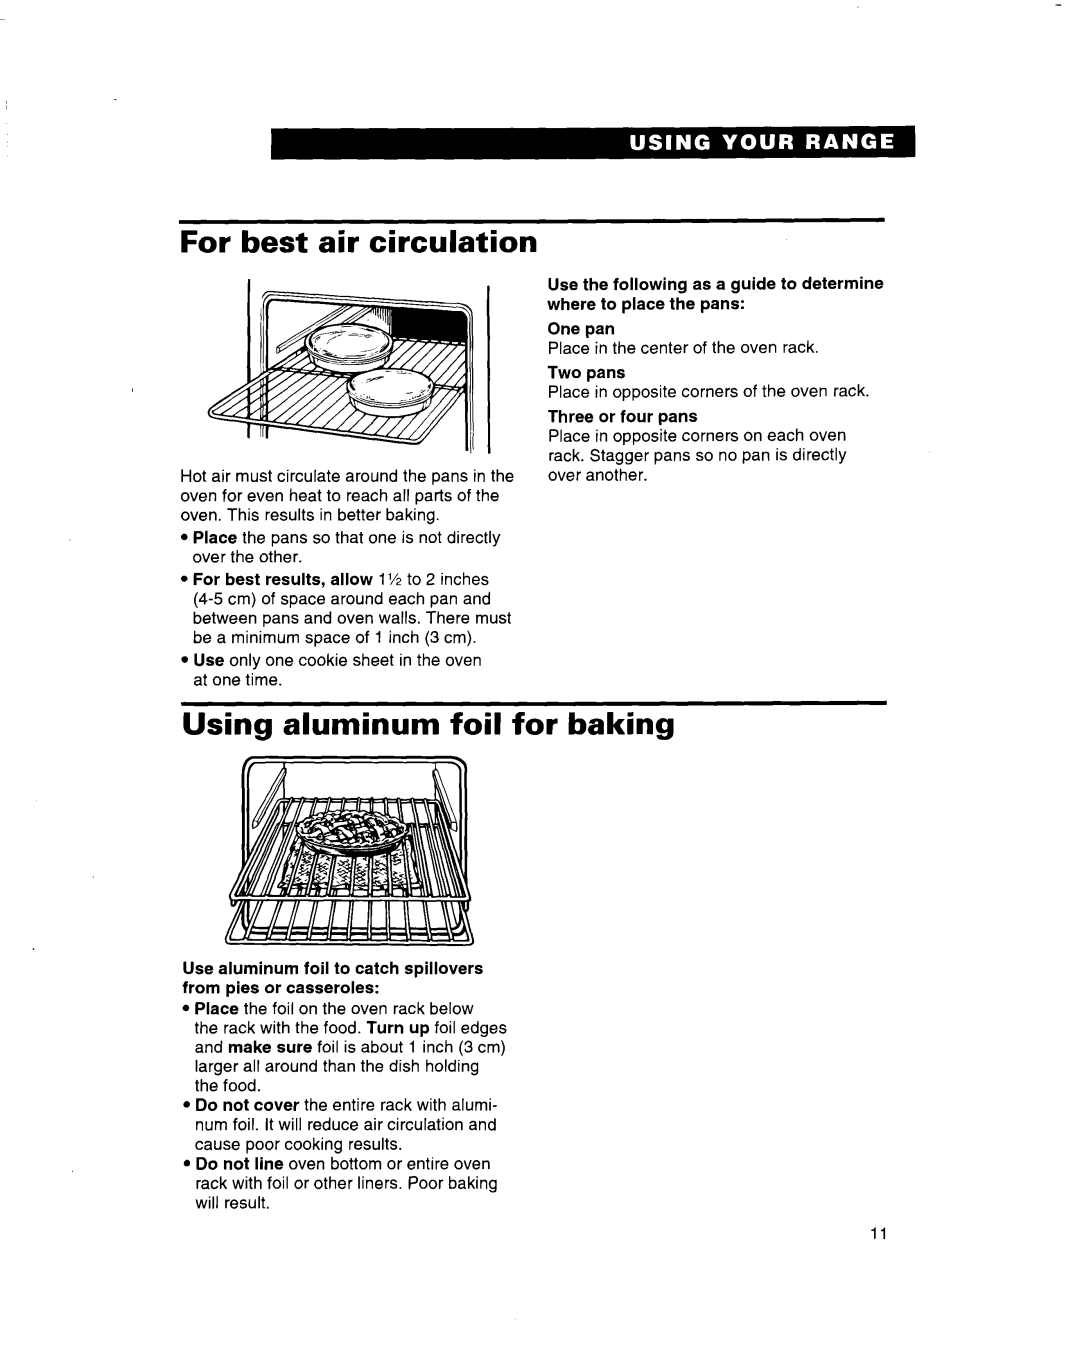 Whirlpool RF314BBD manual For best air circulation, Using aluminum foil for baking 